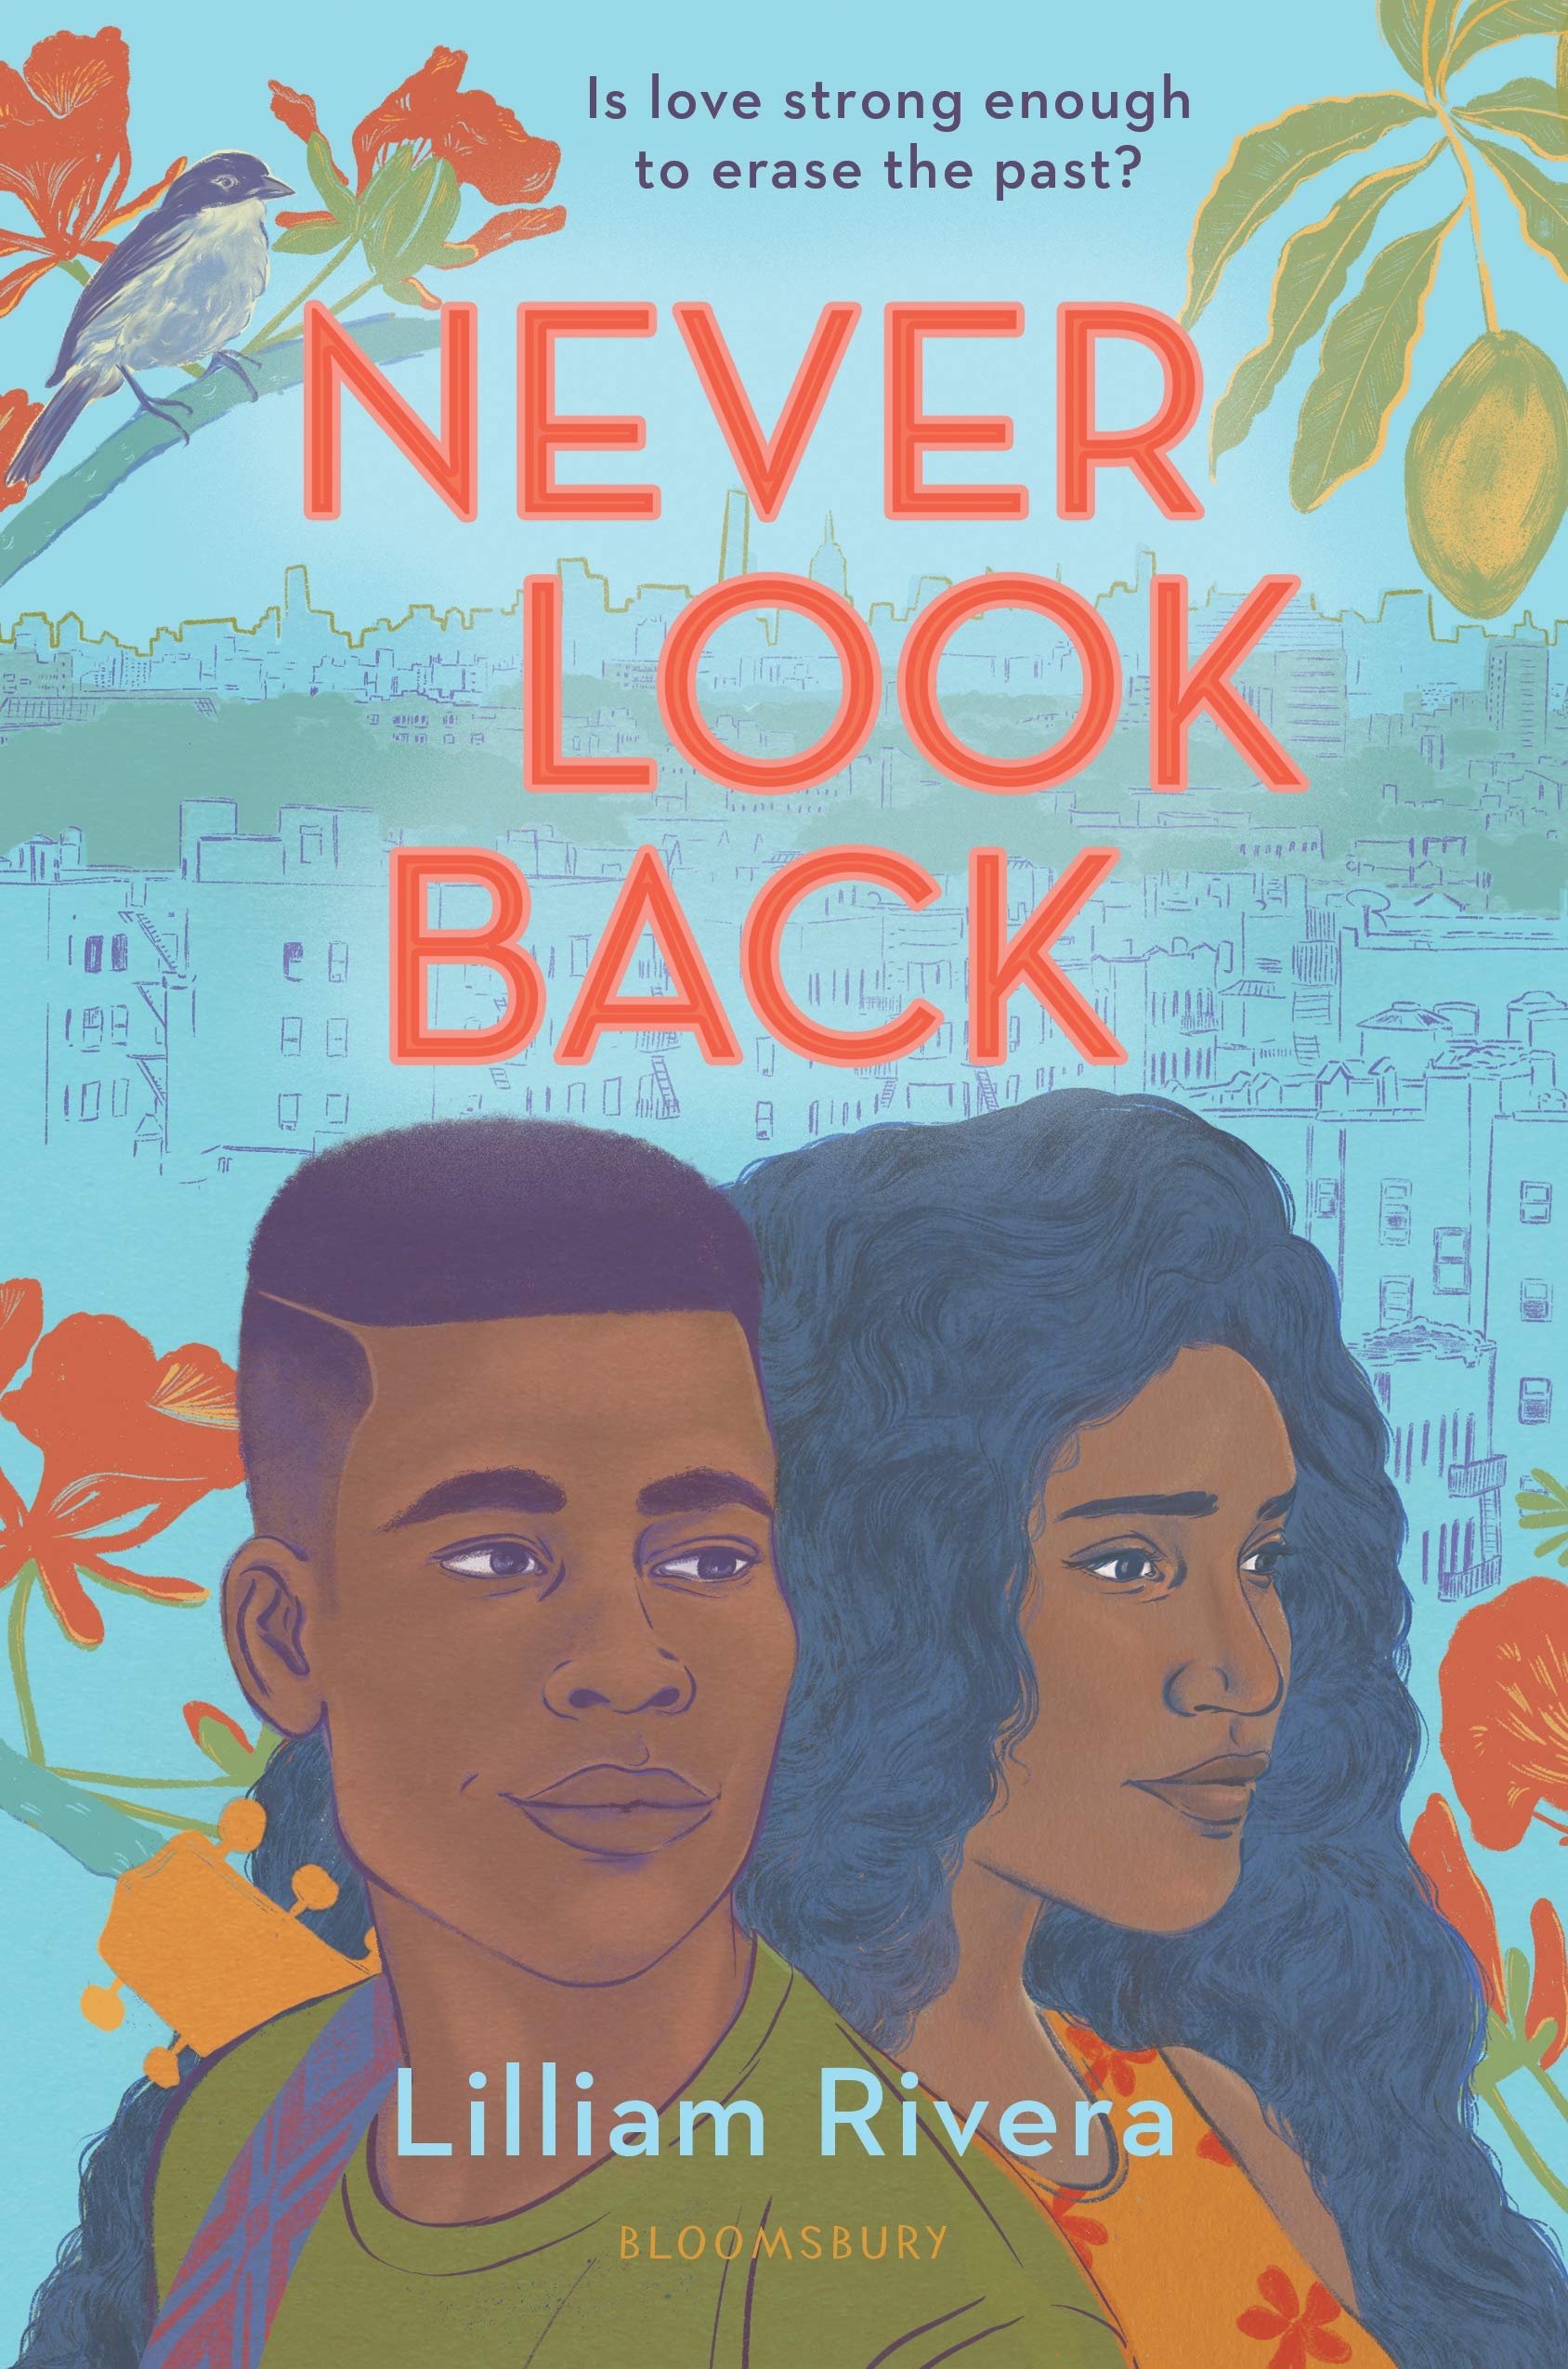 Never Look Back 2020 book cover